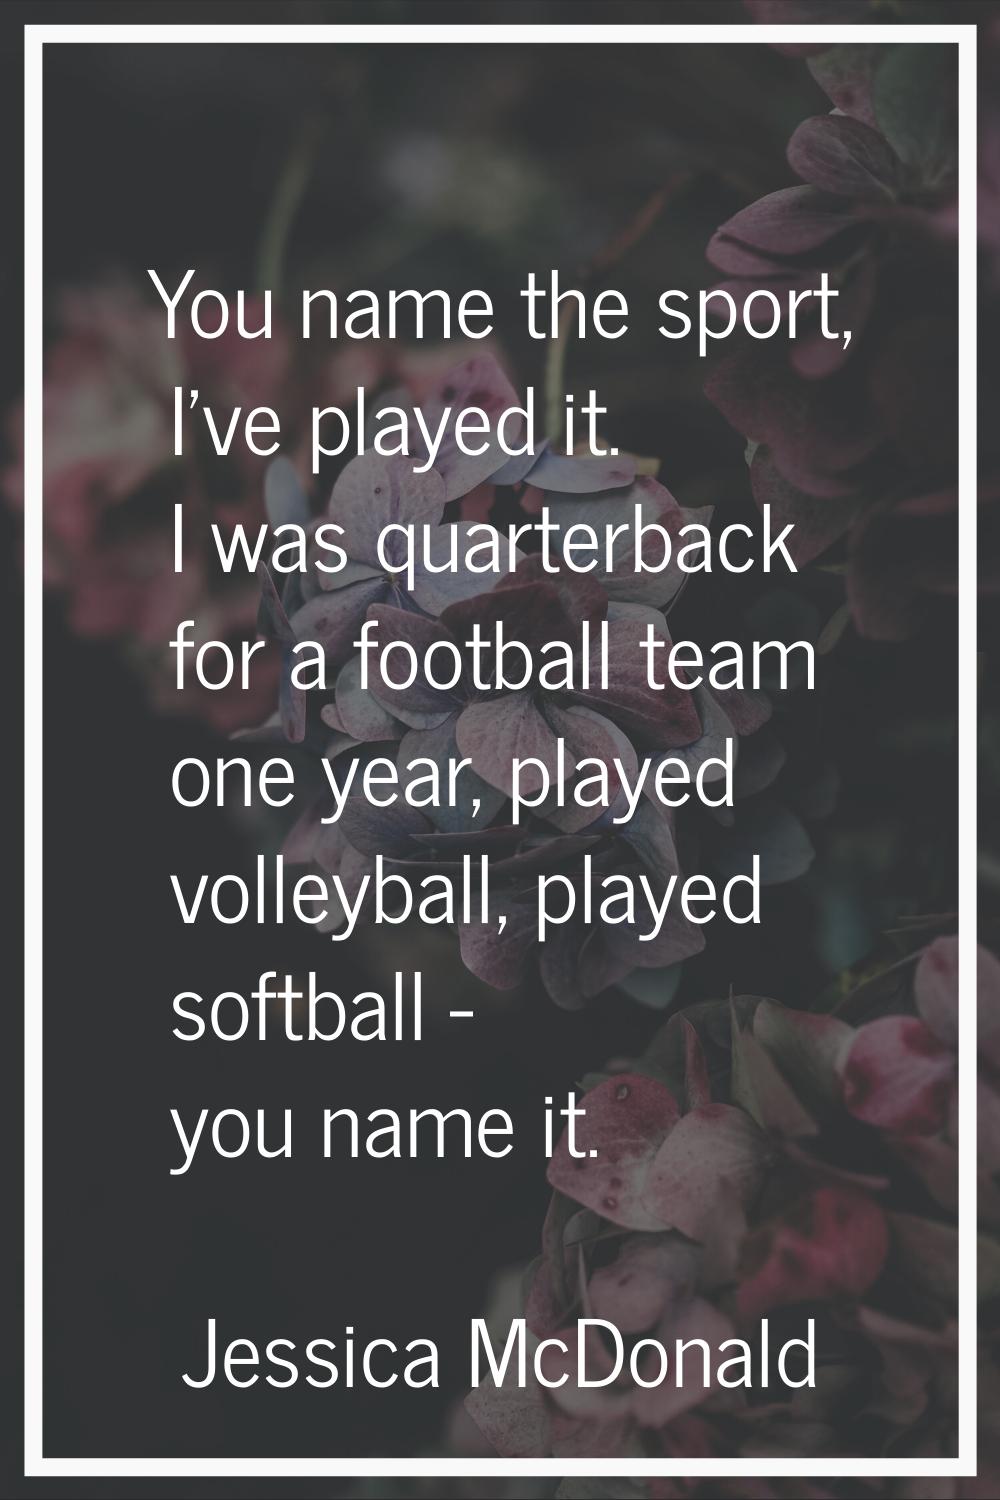 You name the sport, I've played it. I was quarterback for a football team one year, played volleyba